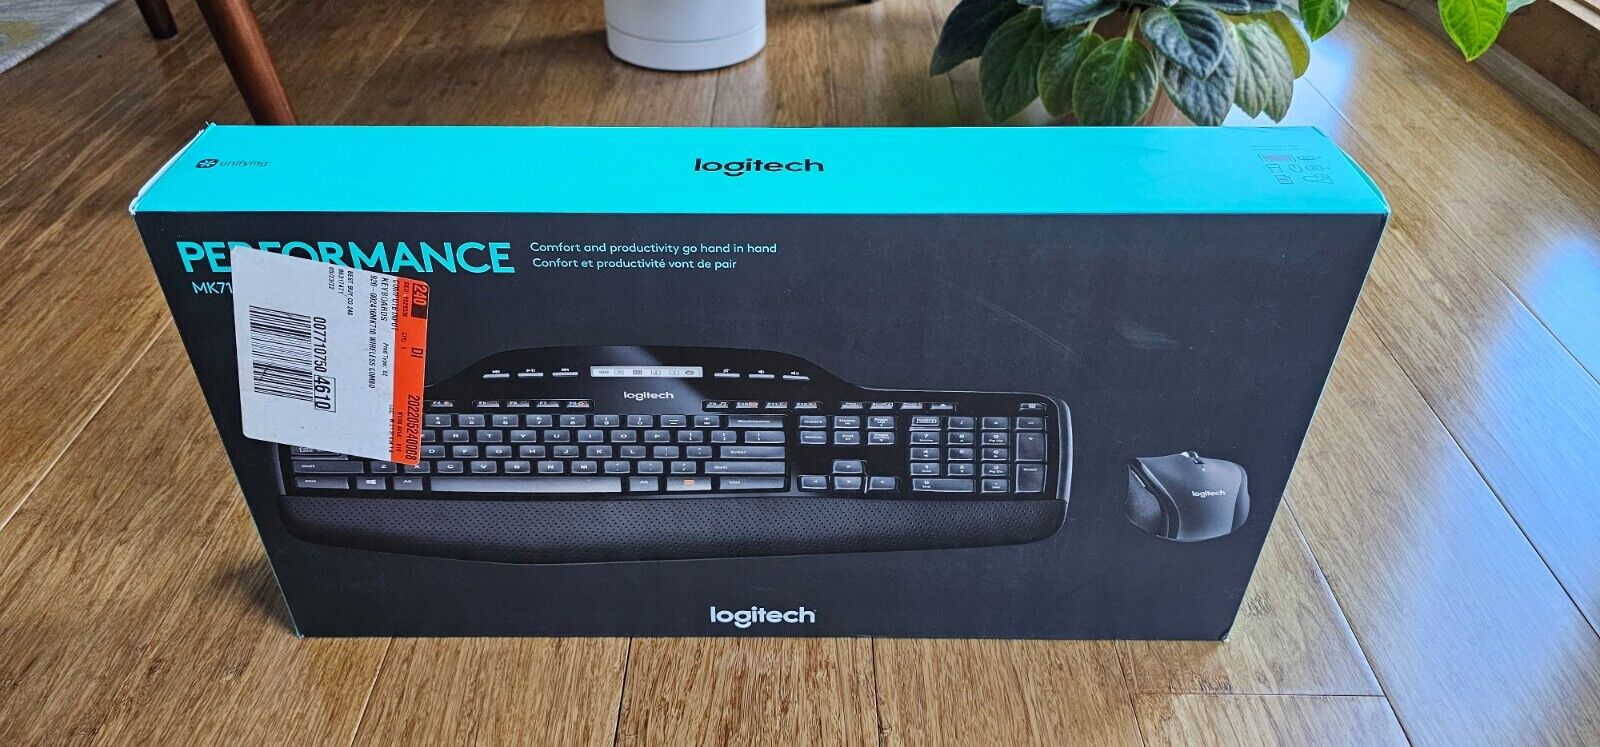 Logitech MK710 Wireless Keyboard And Mouse - New In Box